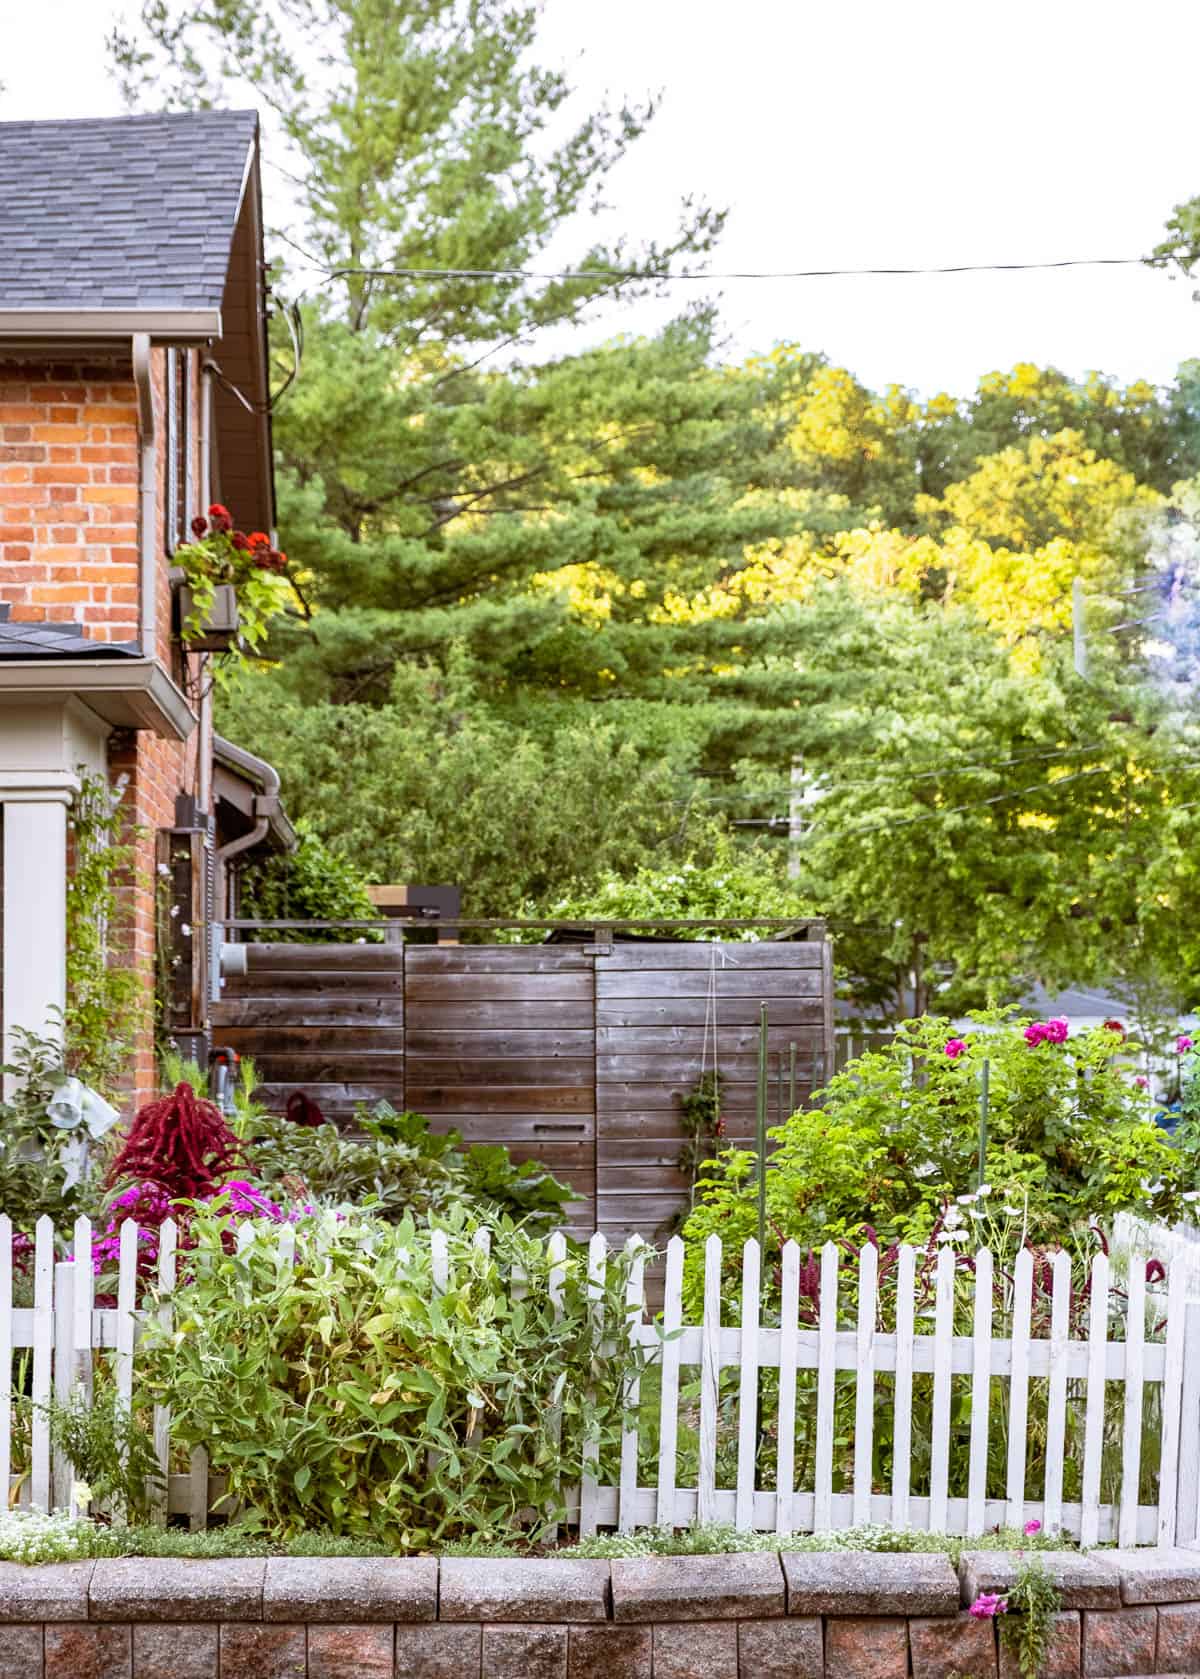 English cottage garden sits behind a white picket fence surrounding a heritage brick workman's cottage.